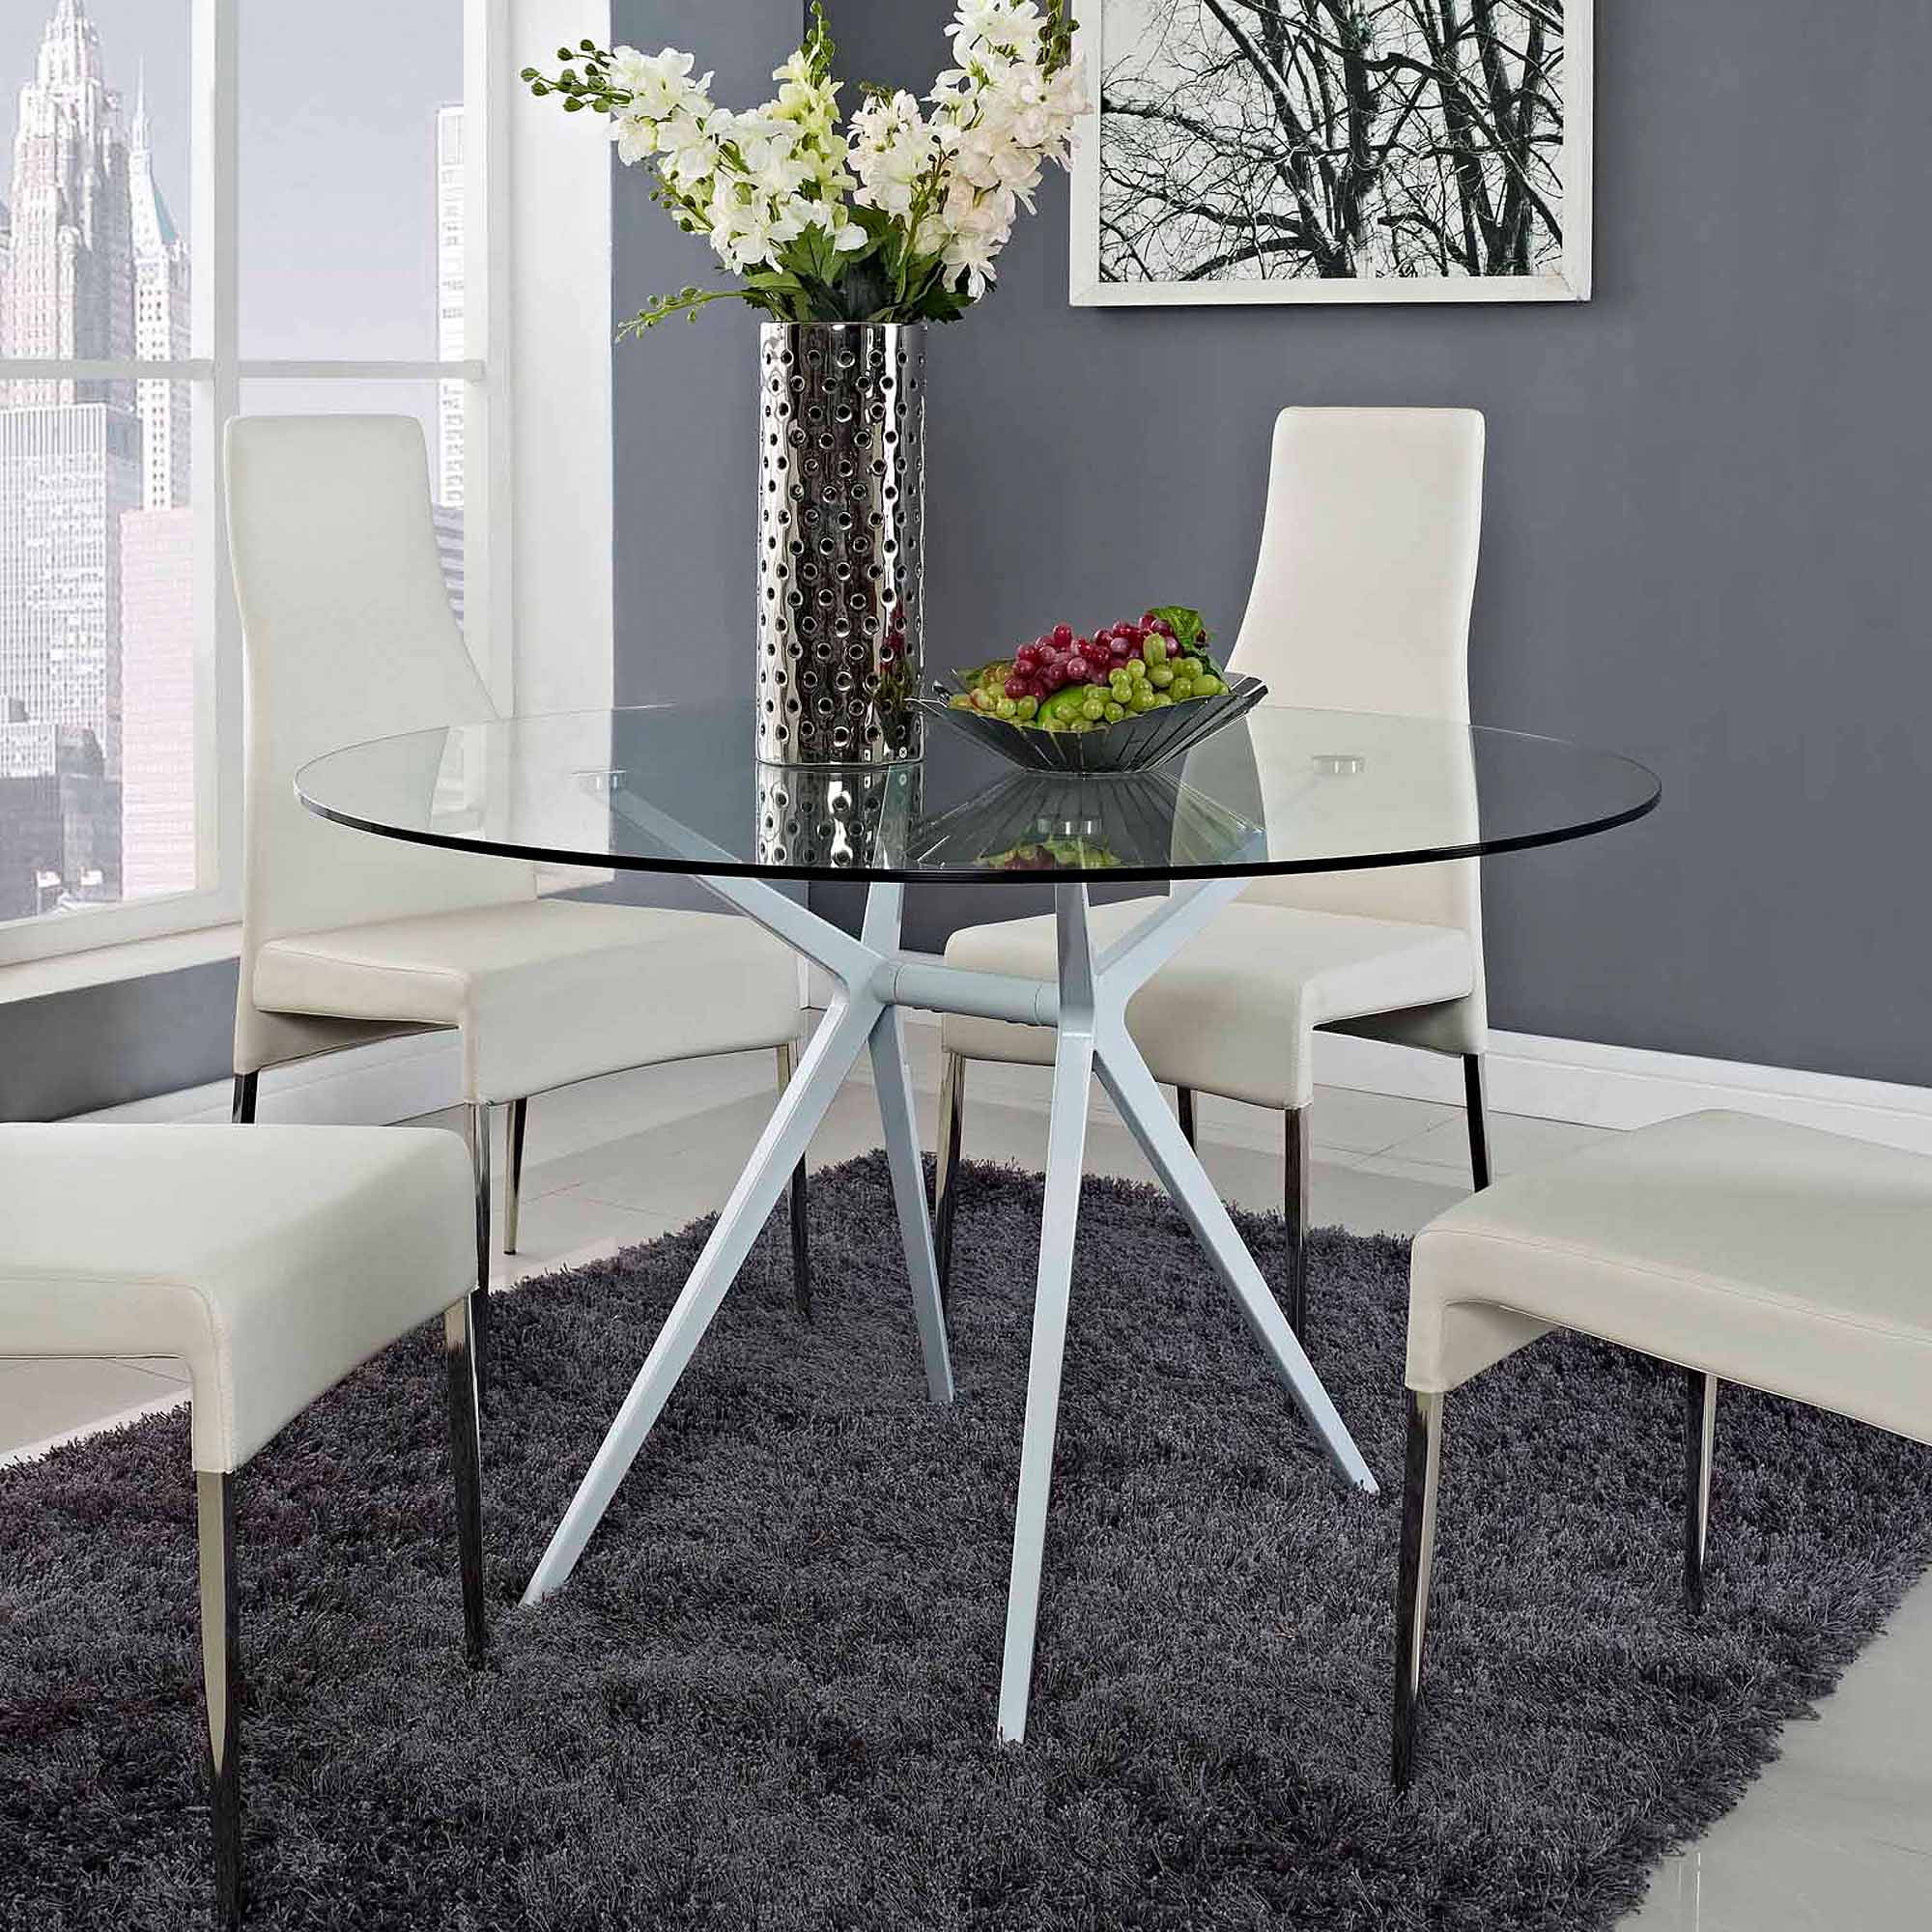 Modway Tilt Modern Dining Table with Glass Top in White - Walmart.com